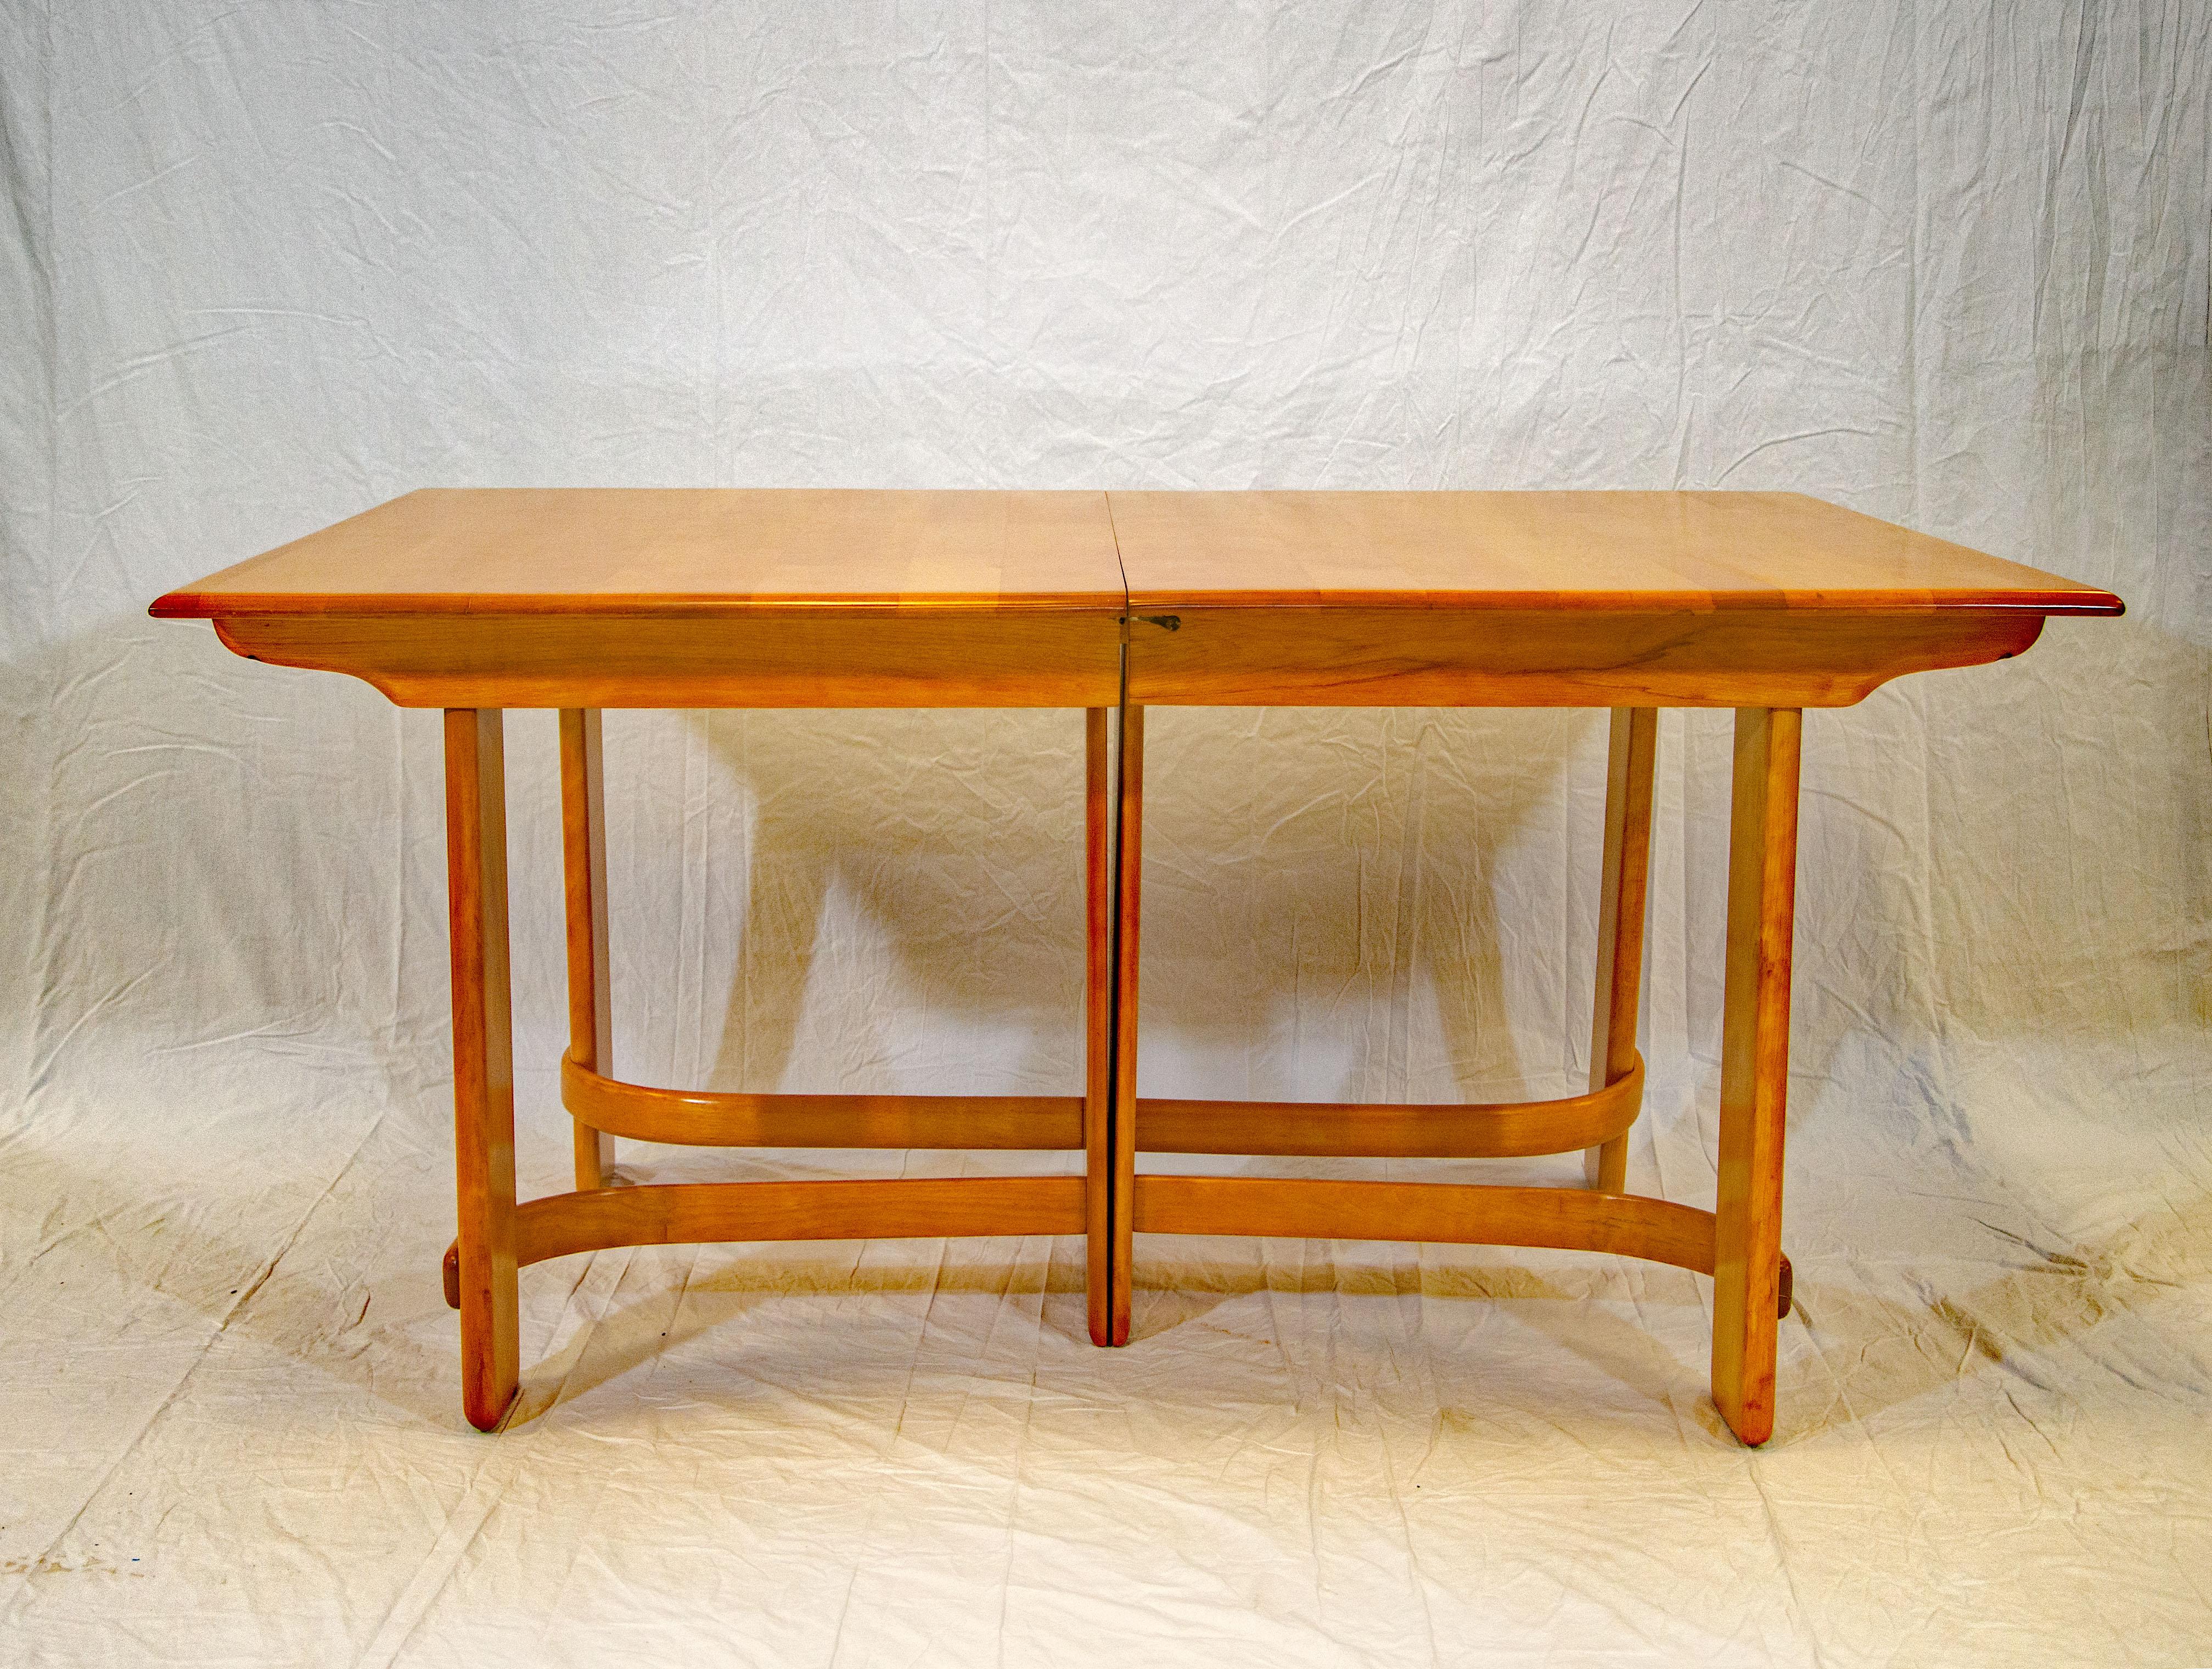 Unusual early production dining table as quoted in the Harris Gertz Heywood Wakefield book 